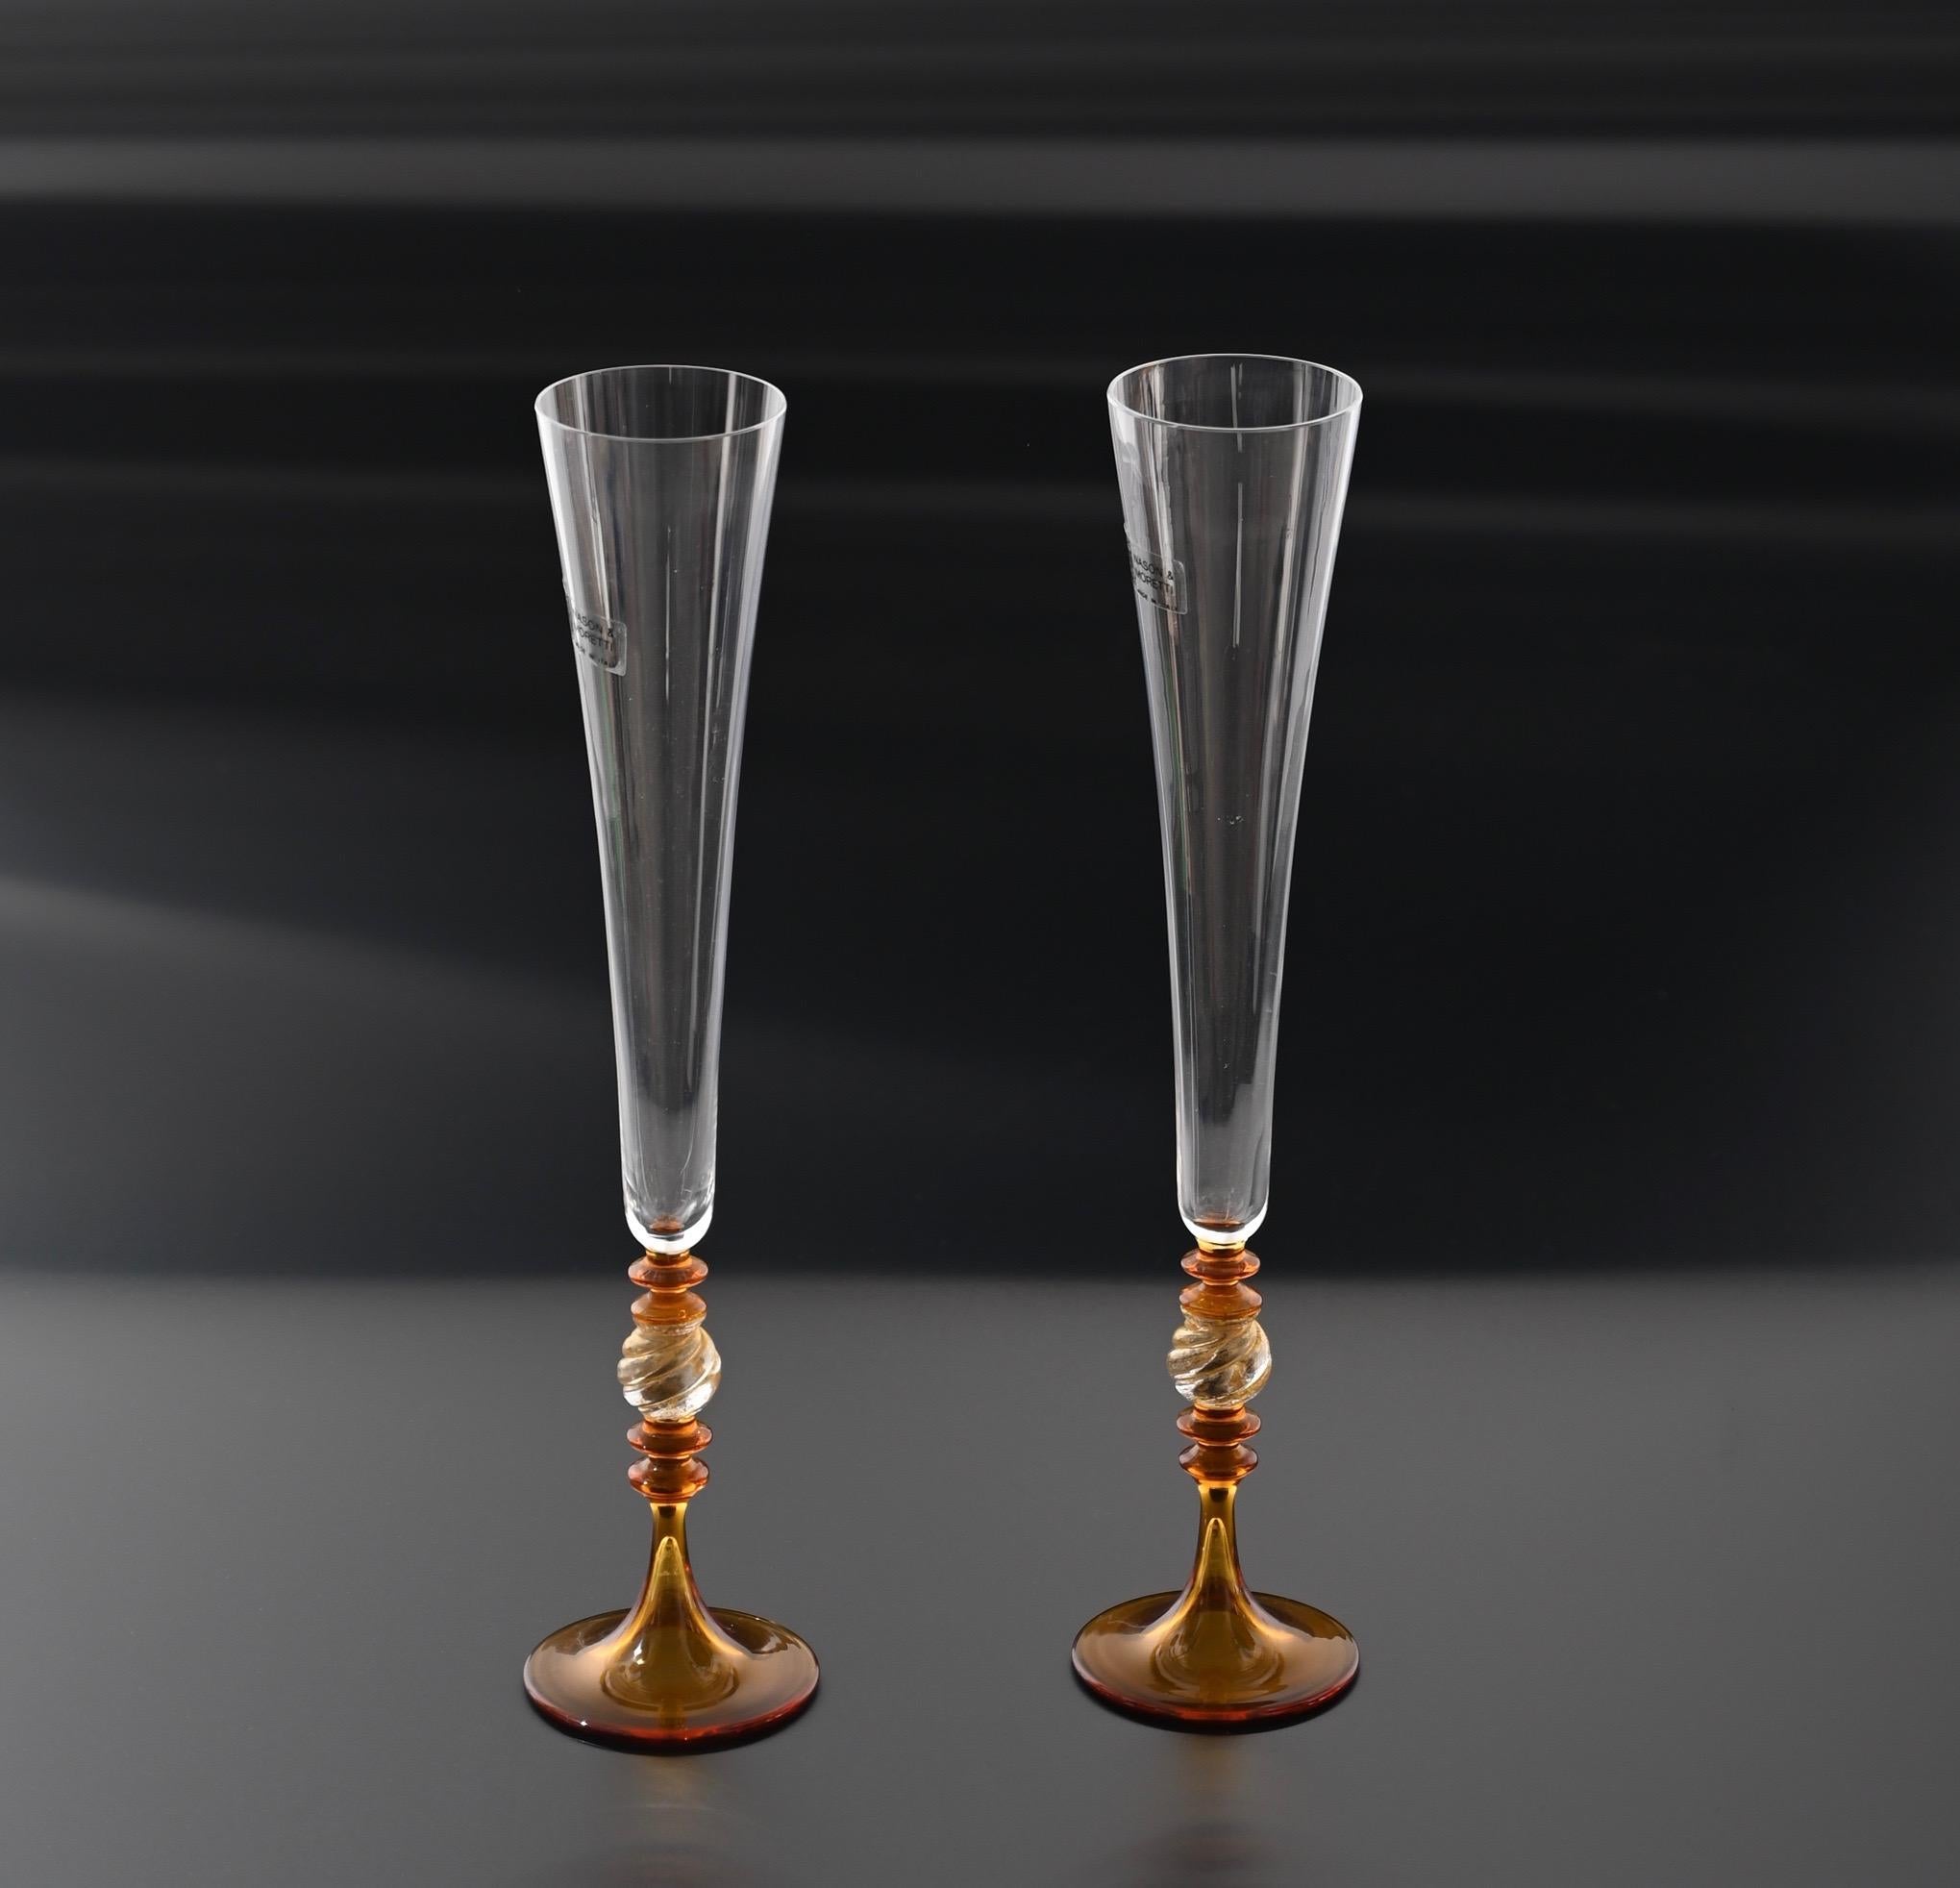 Pair of Murano crystal glass, amber and gold goblets glasses. Nason and Moretti designed these fantastic pieces in Murano, Venice, during the 1980s.

This set of champagne glasses has luxurious golden dust into the orange amber, and constantly